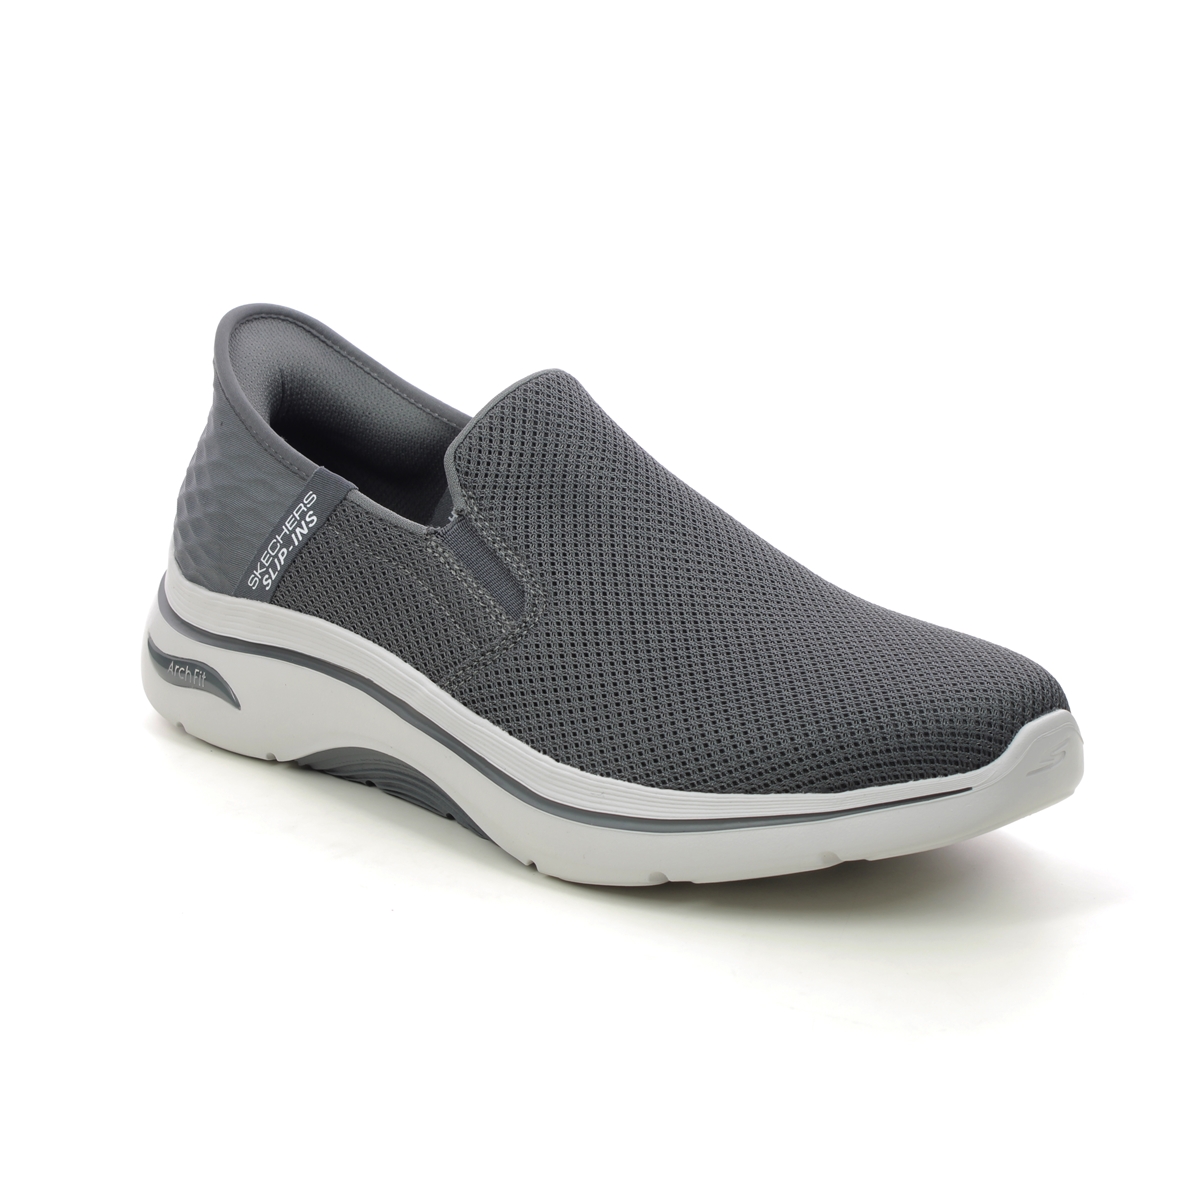 Skechers Slip Ins Arch 2 CHAR Charcoal Mens trainers 216600 in a Plain Textile in Size 8